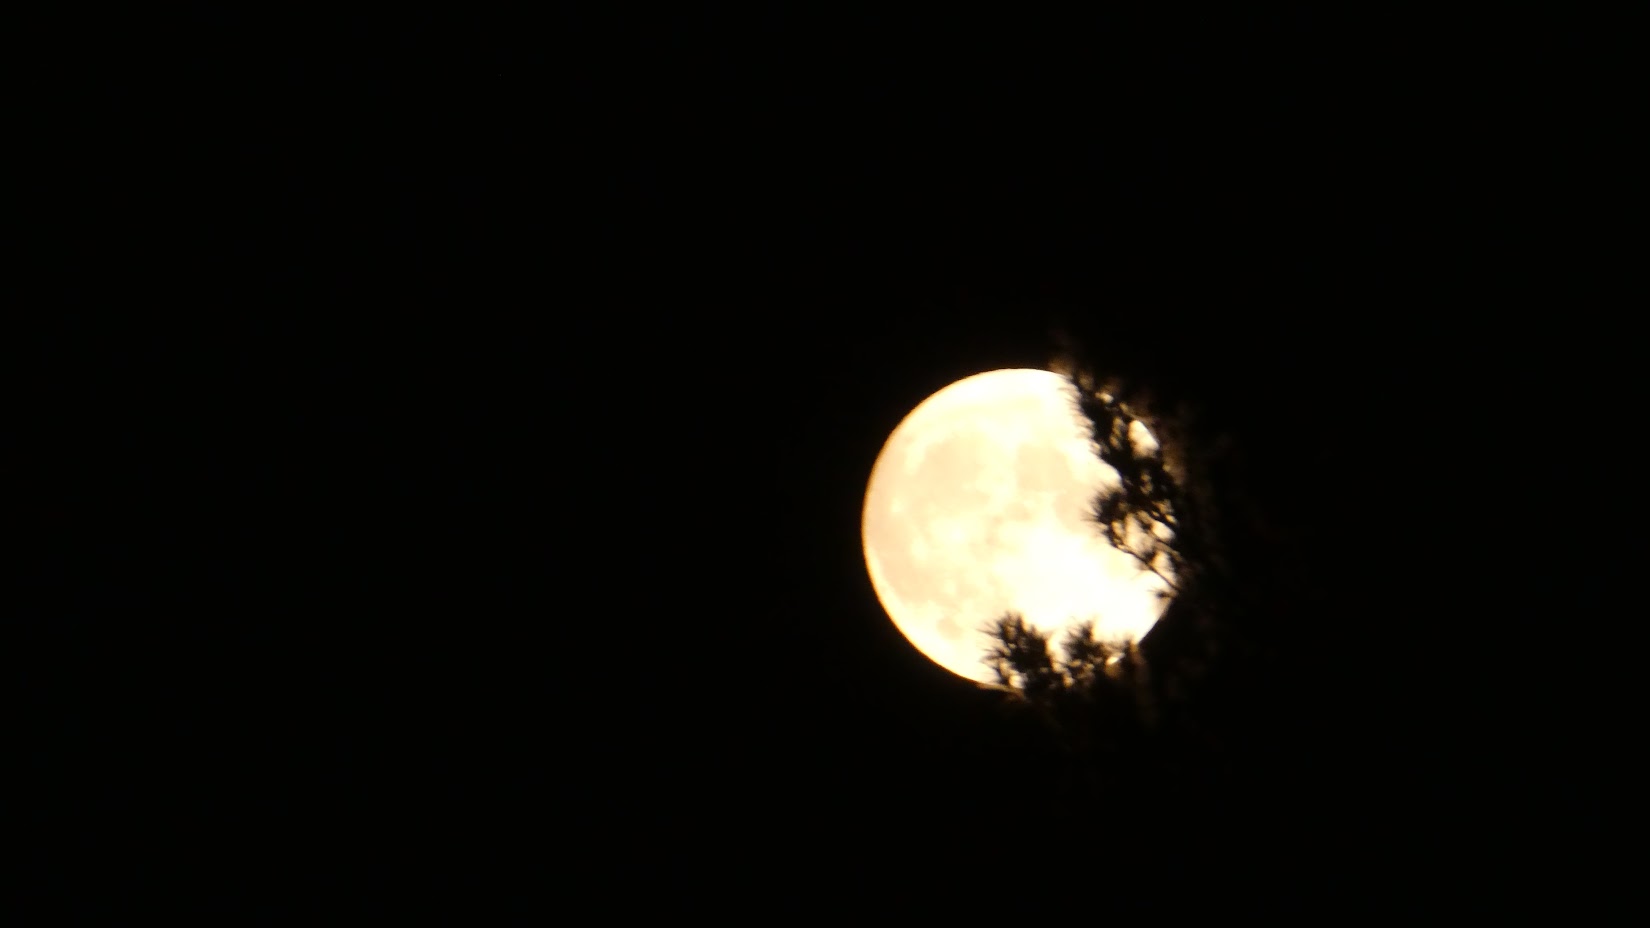 picture of the night sky showing a full moon taken while camping in the backcountry